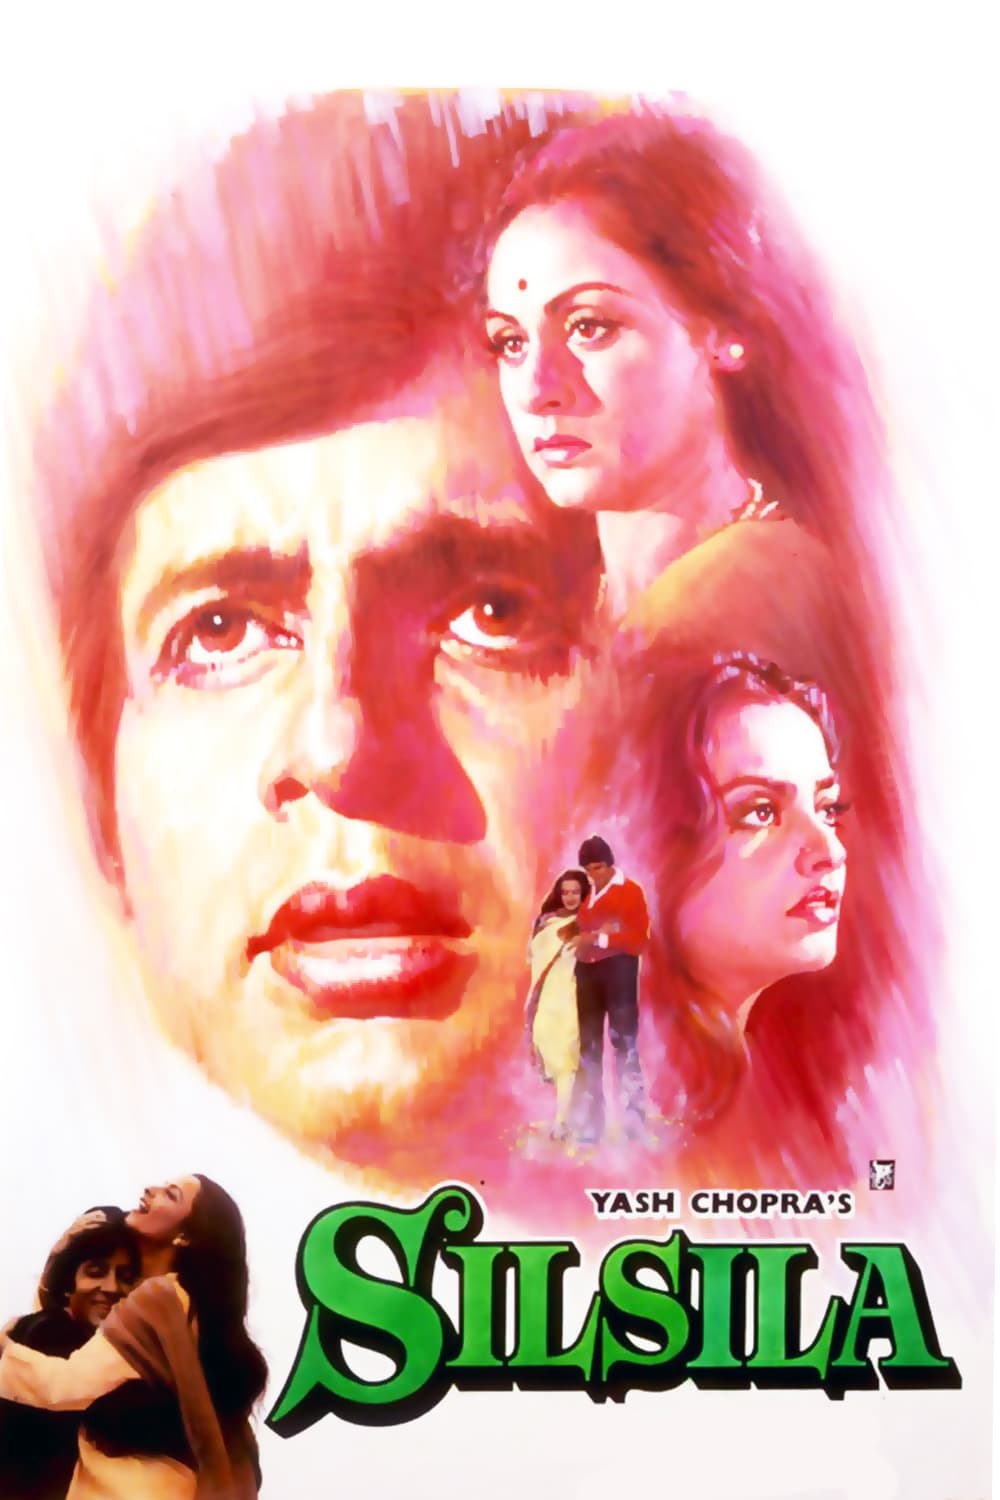 Poster for the movie "Silsila"